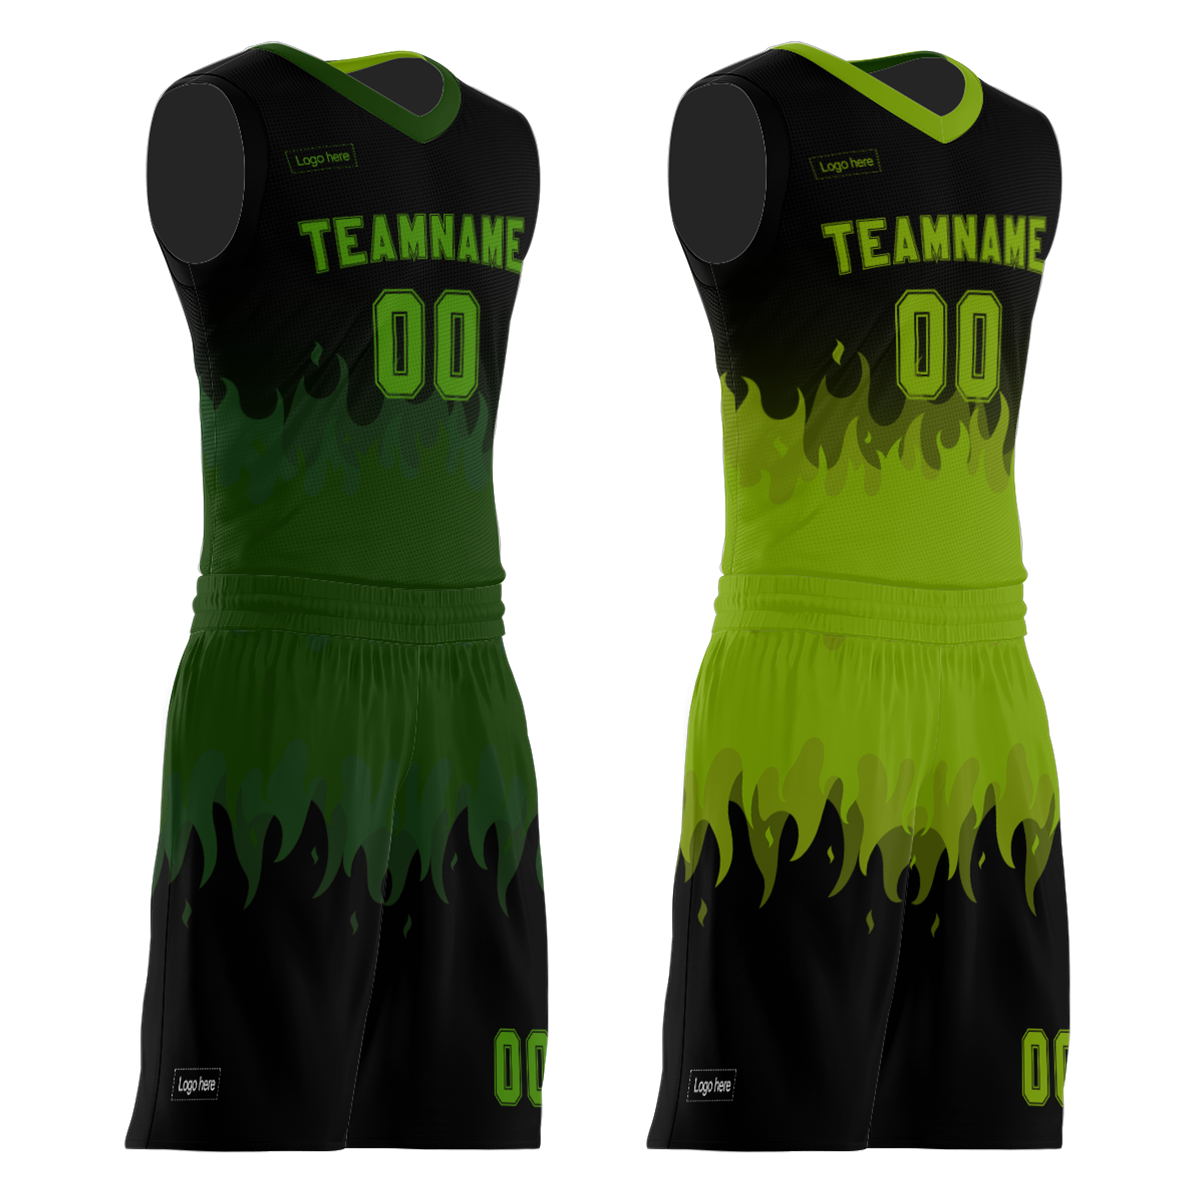 Wholesale Customize Men's Reversible Basketball Jerseys Design With Sublimation Print Basketball Uniforms for Collage Students